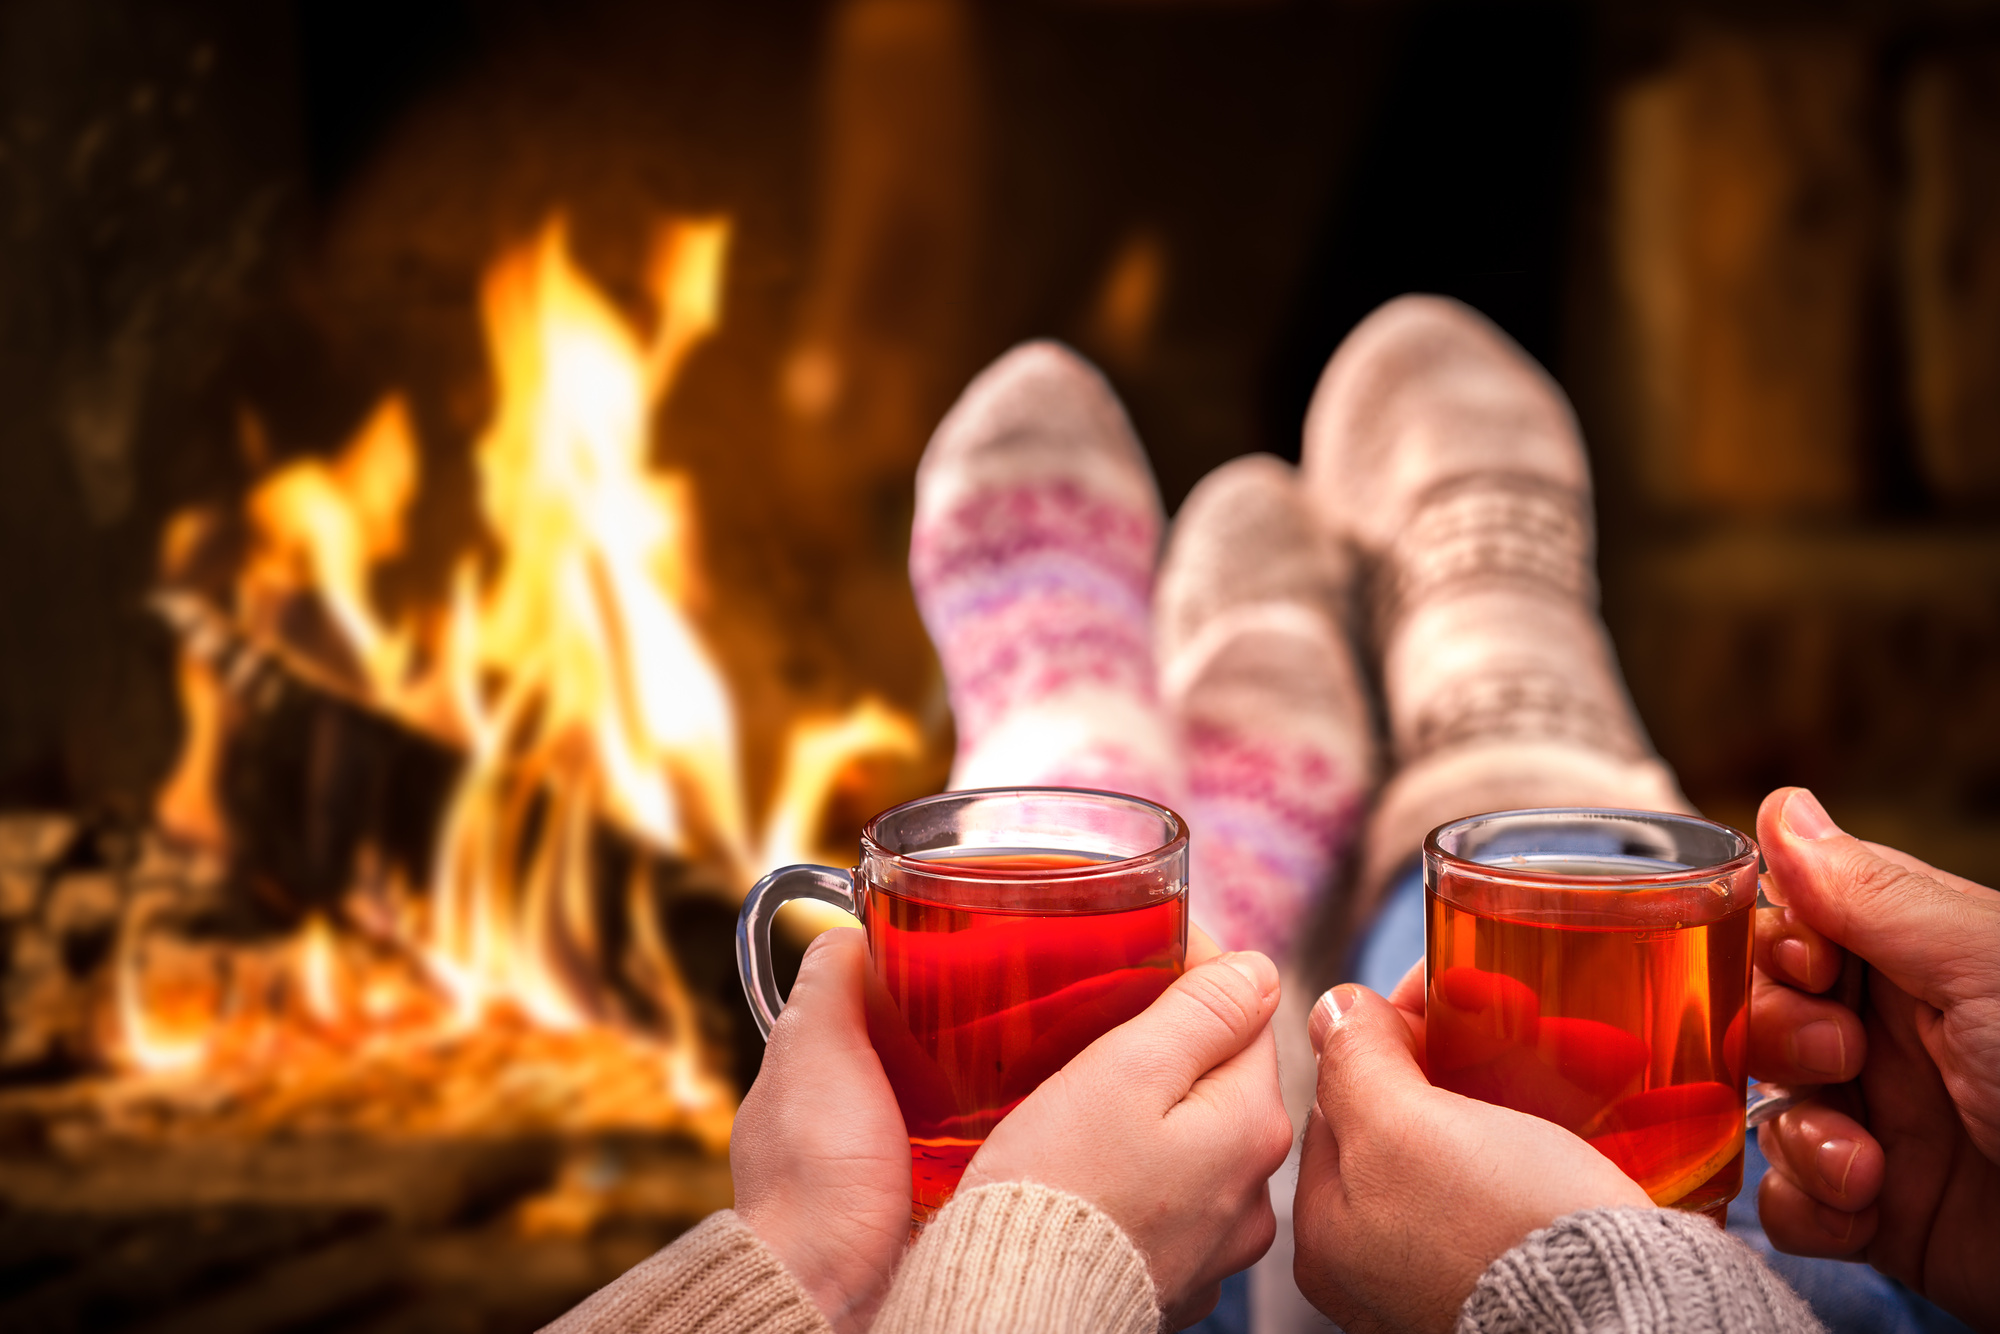 The colder months of the year come with added expense. Here are some of the best ways to reduce heating costs this winter.